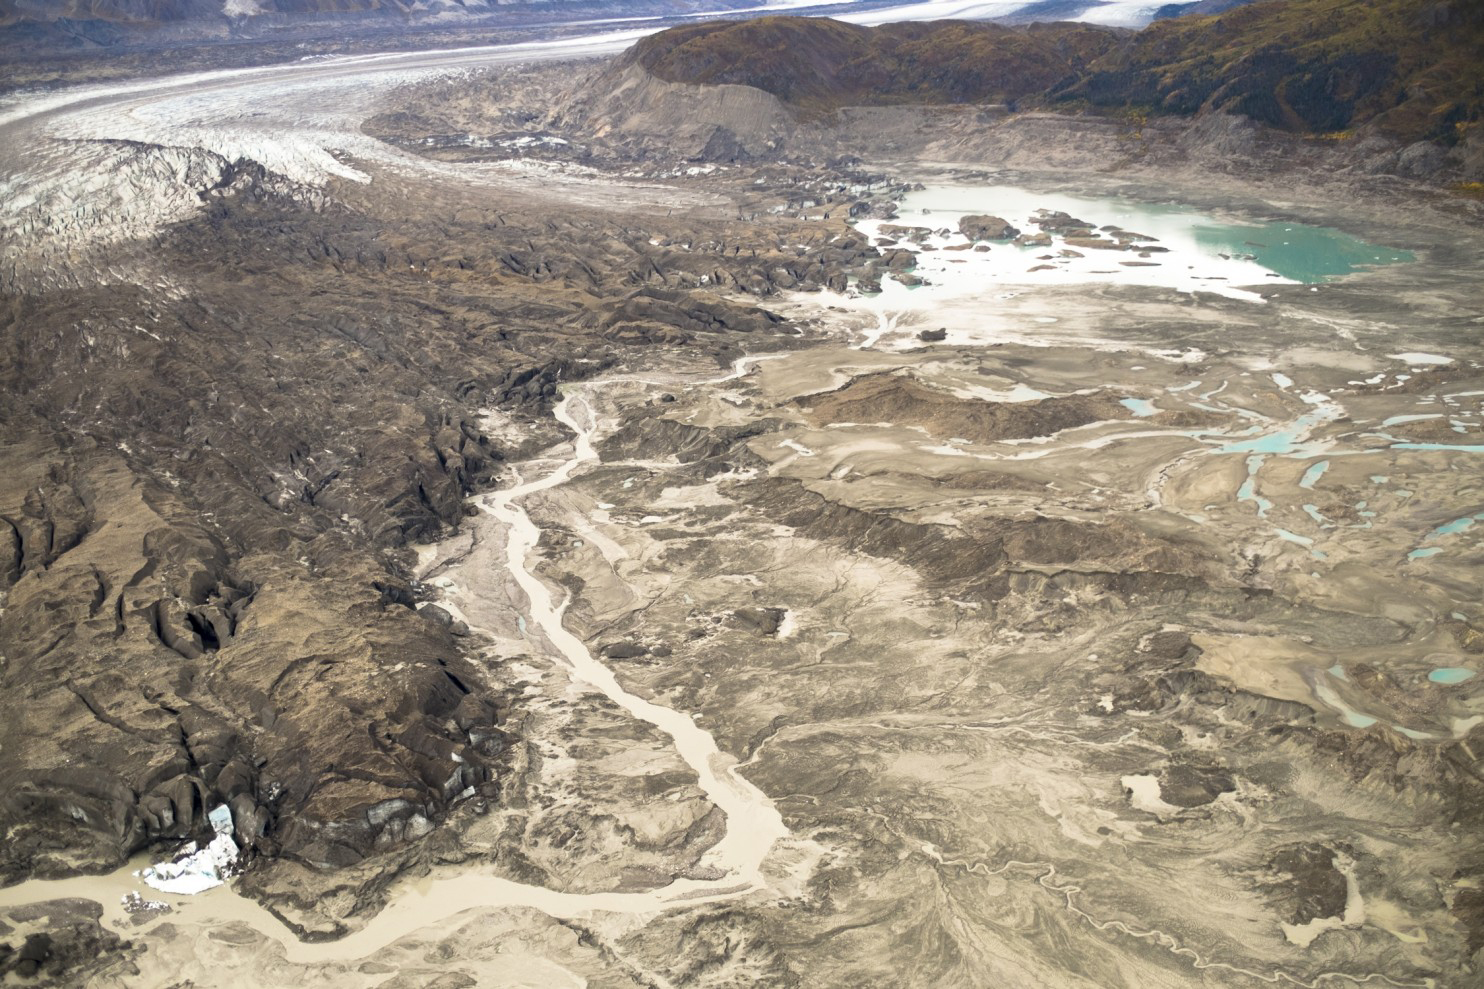 A stream runs along the toe of Kaskawulsh glacier in Canada. In 2016, this channel allowed the glacier's meltwater to drain in a different direction than normal, resulting in the Slims River water being rerouted to a different river system. MUST CREDIT: Dan Shugar.